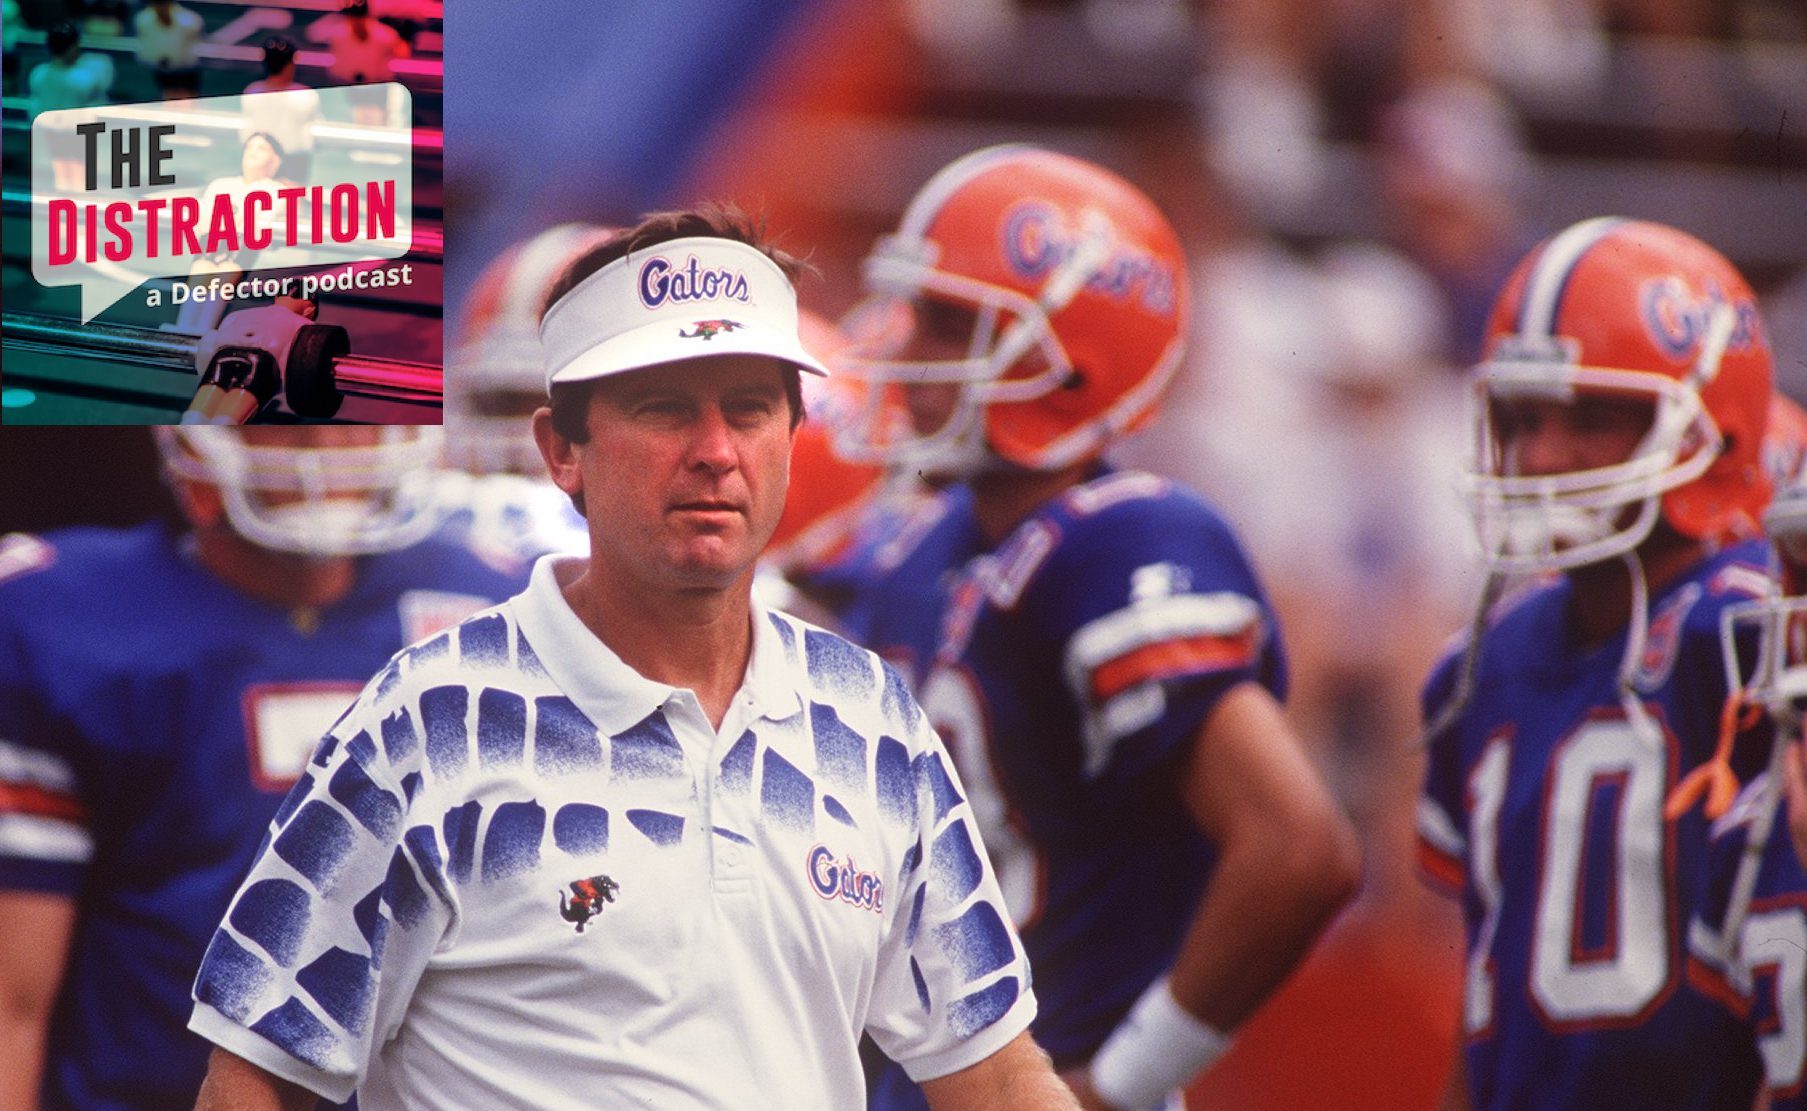 Steve Spurrier on the sidelines during a 1994 game in which his Florida Gators beat Kentucky by nearly 70 points.